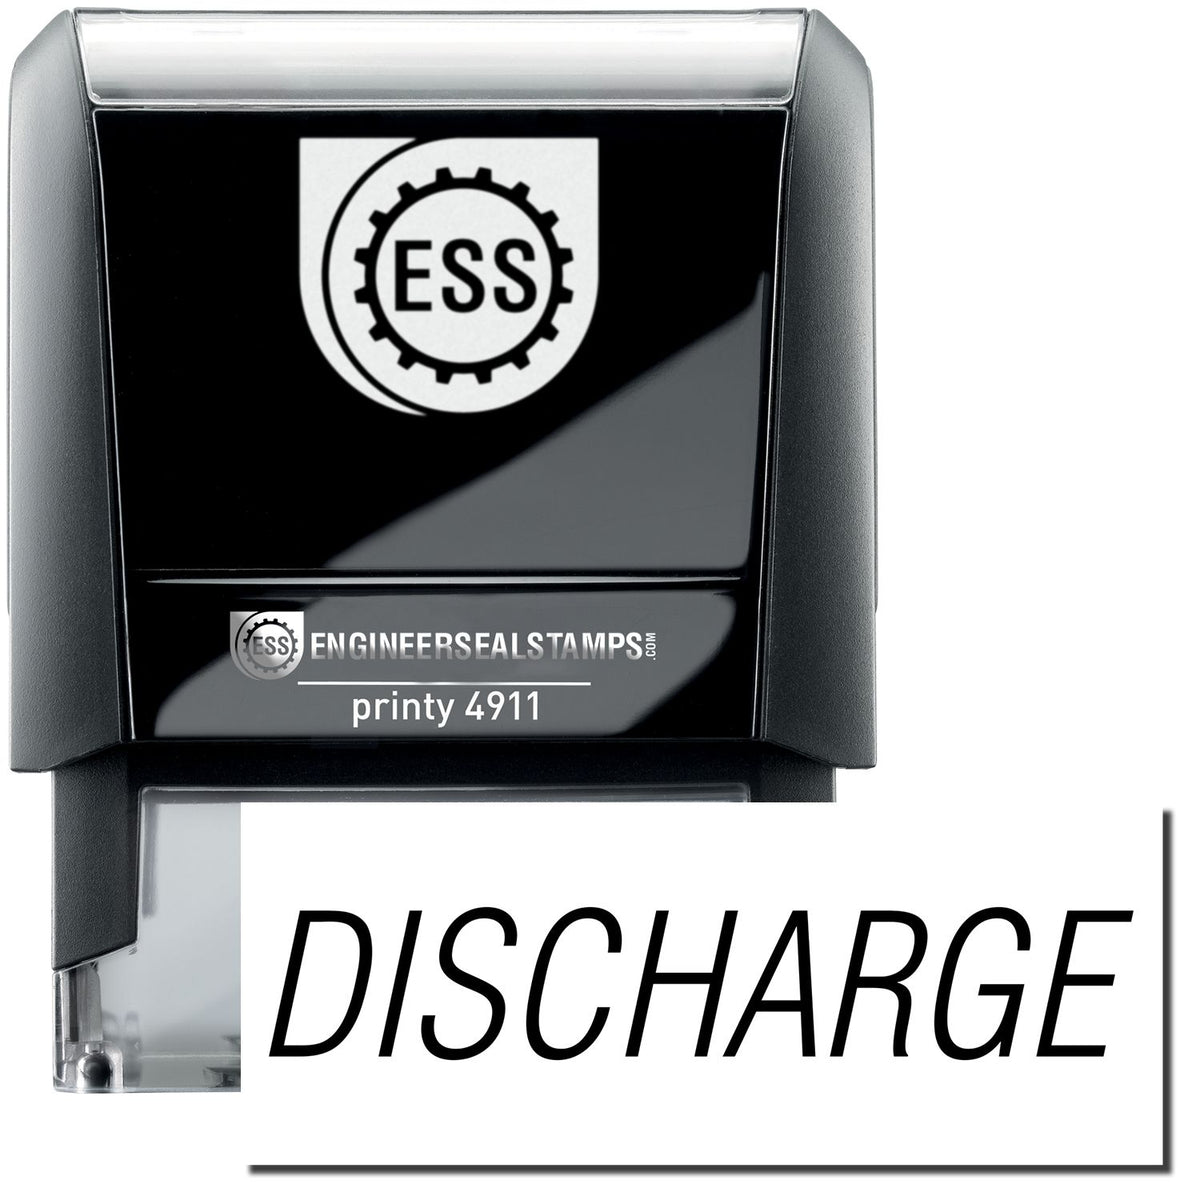 A self-inking stamp with a stamped image showing how the text &quot;DISCHARGE&quot; is displayed after stamping.